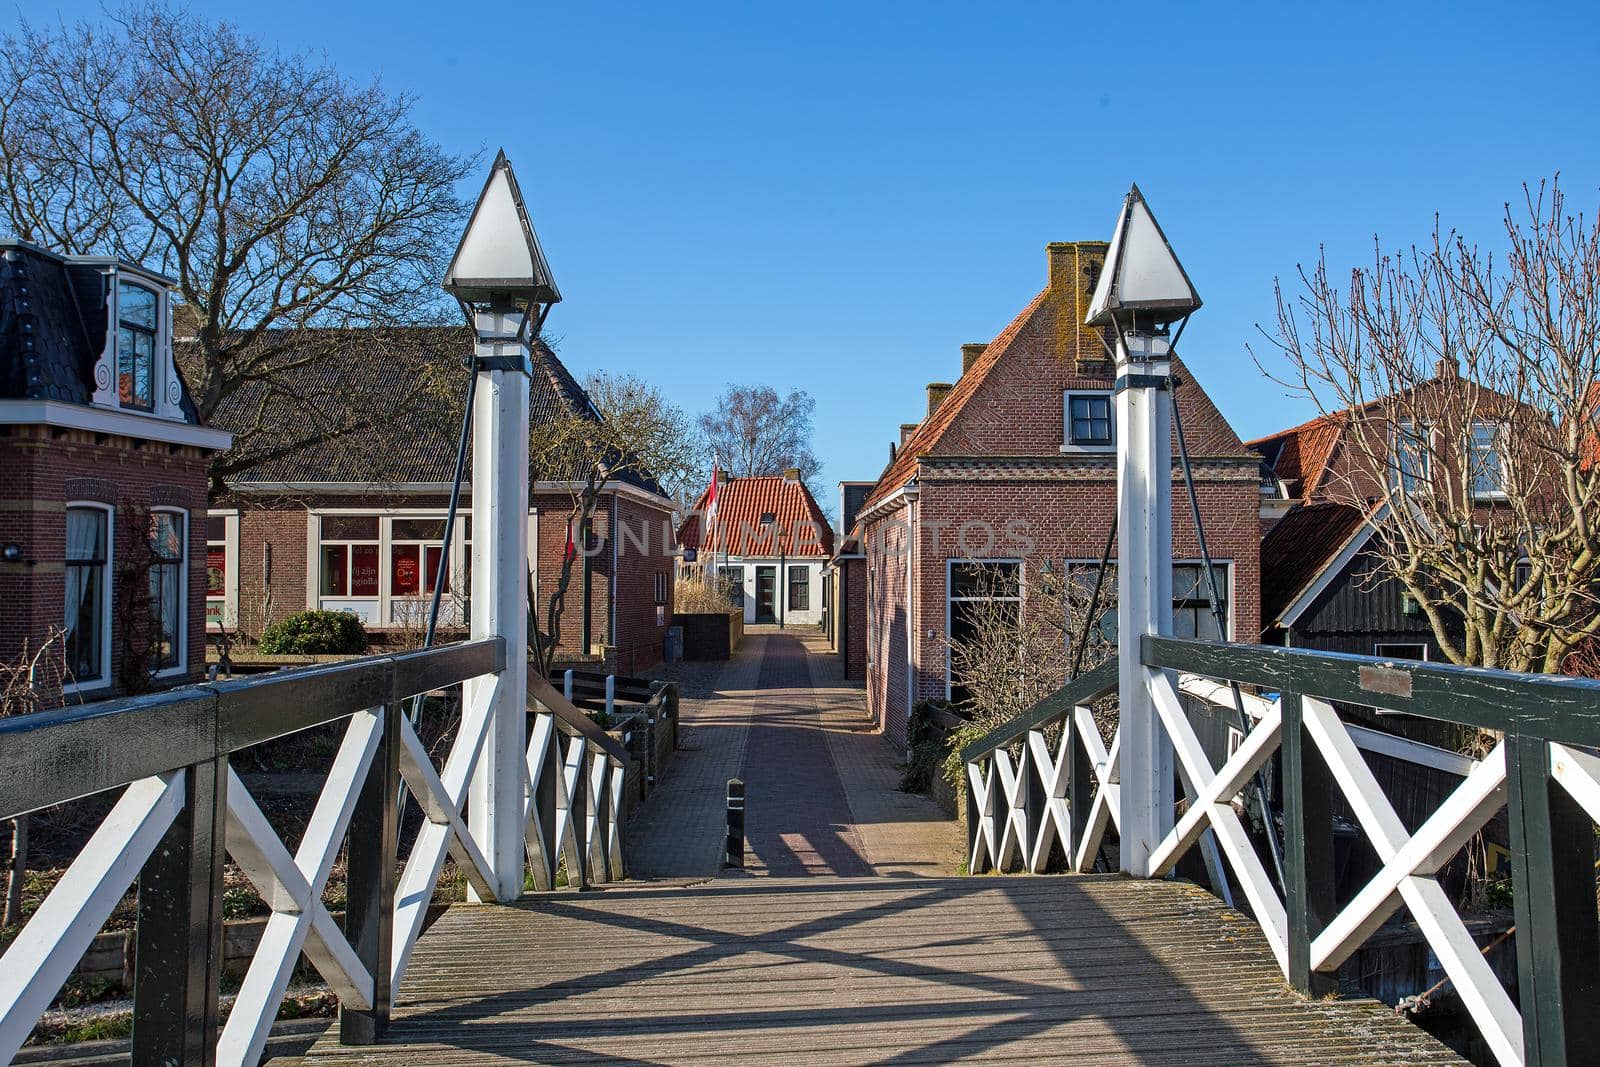 Medieval bridge and houses in the city Hindeloopen in the Netherlands by devy